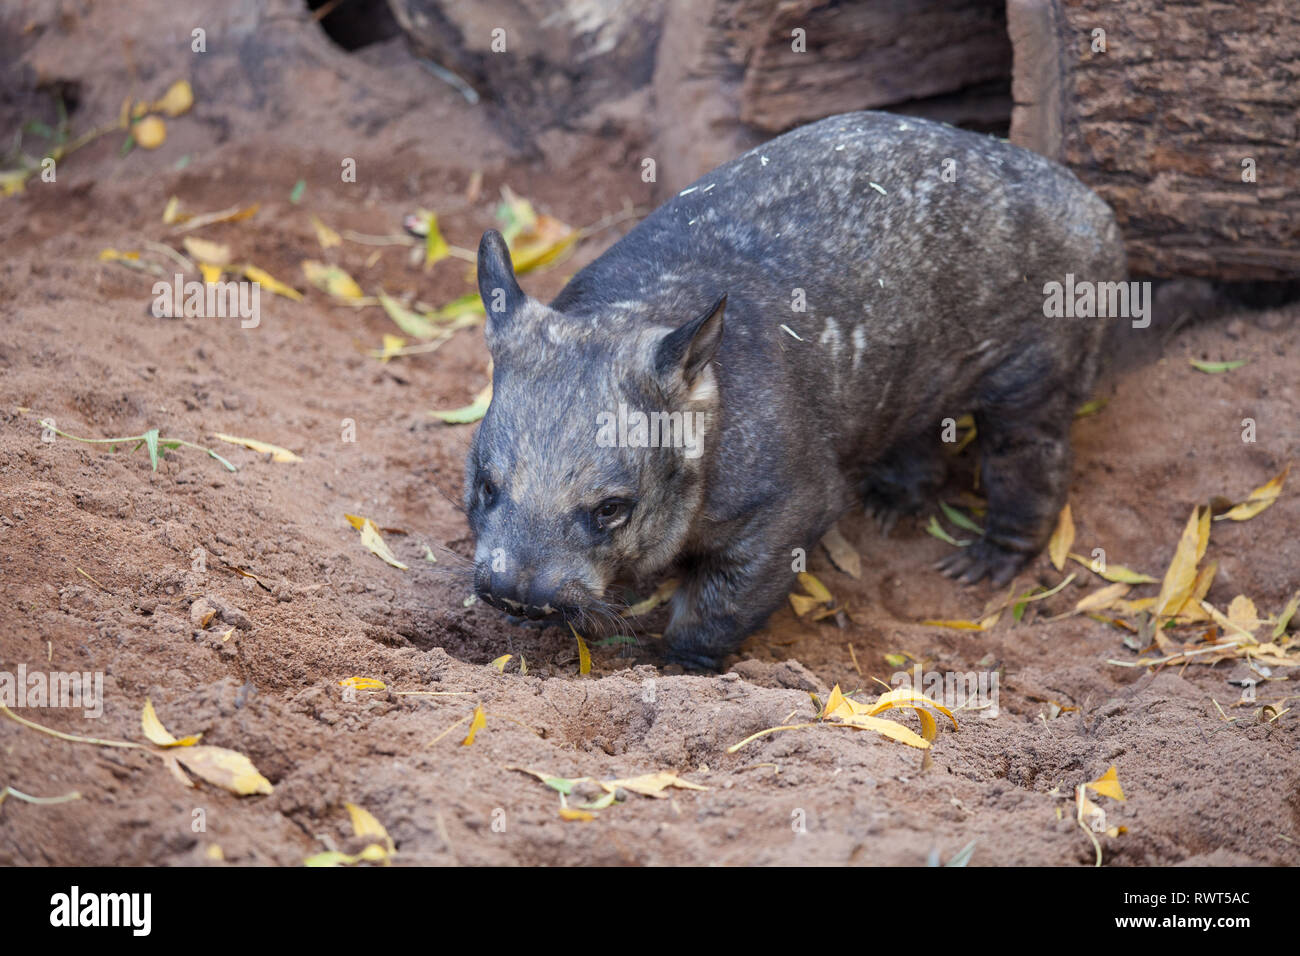 Gorgeous Burly Southern Hairy-Nosed Wombat burrows the sand in surrounded of yellow leaves Stock Photo